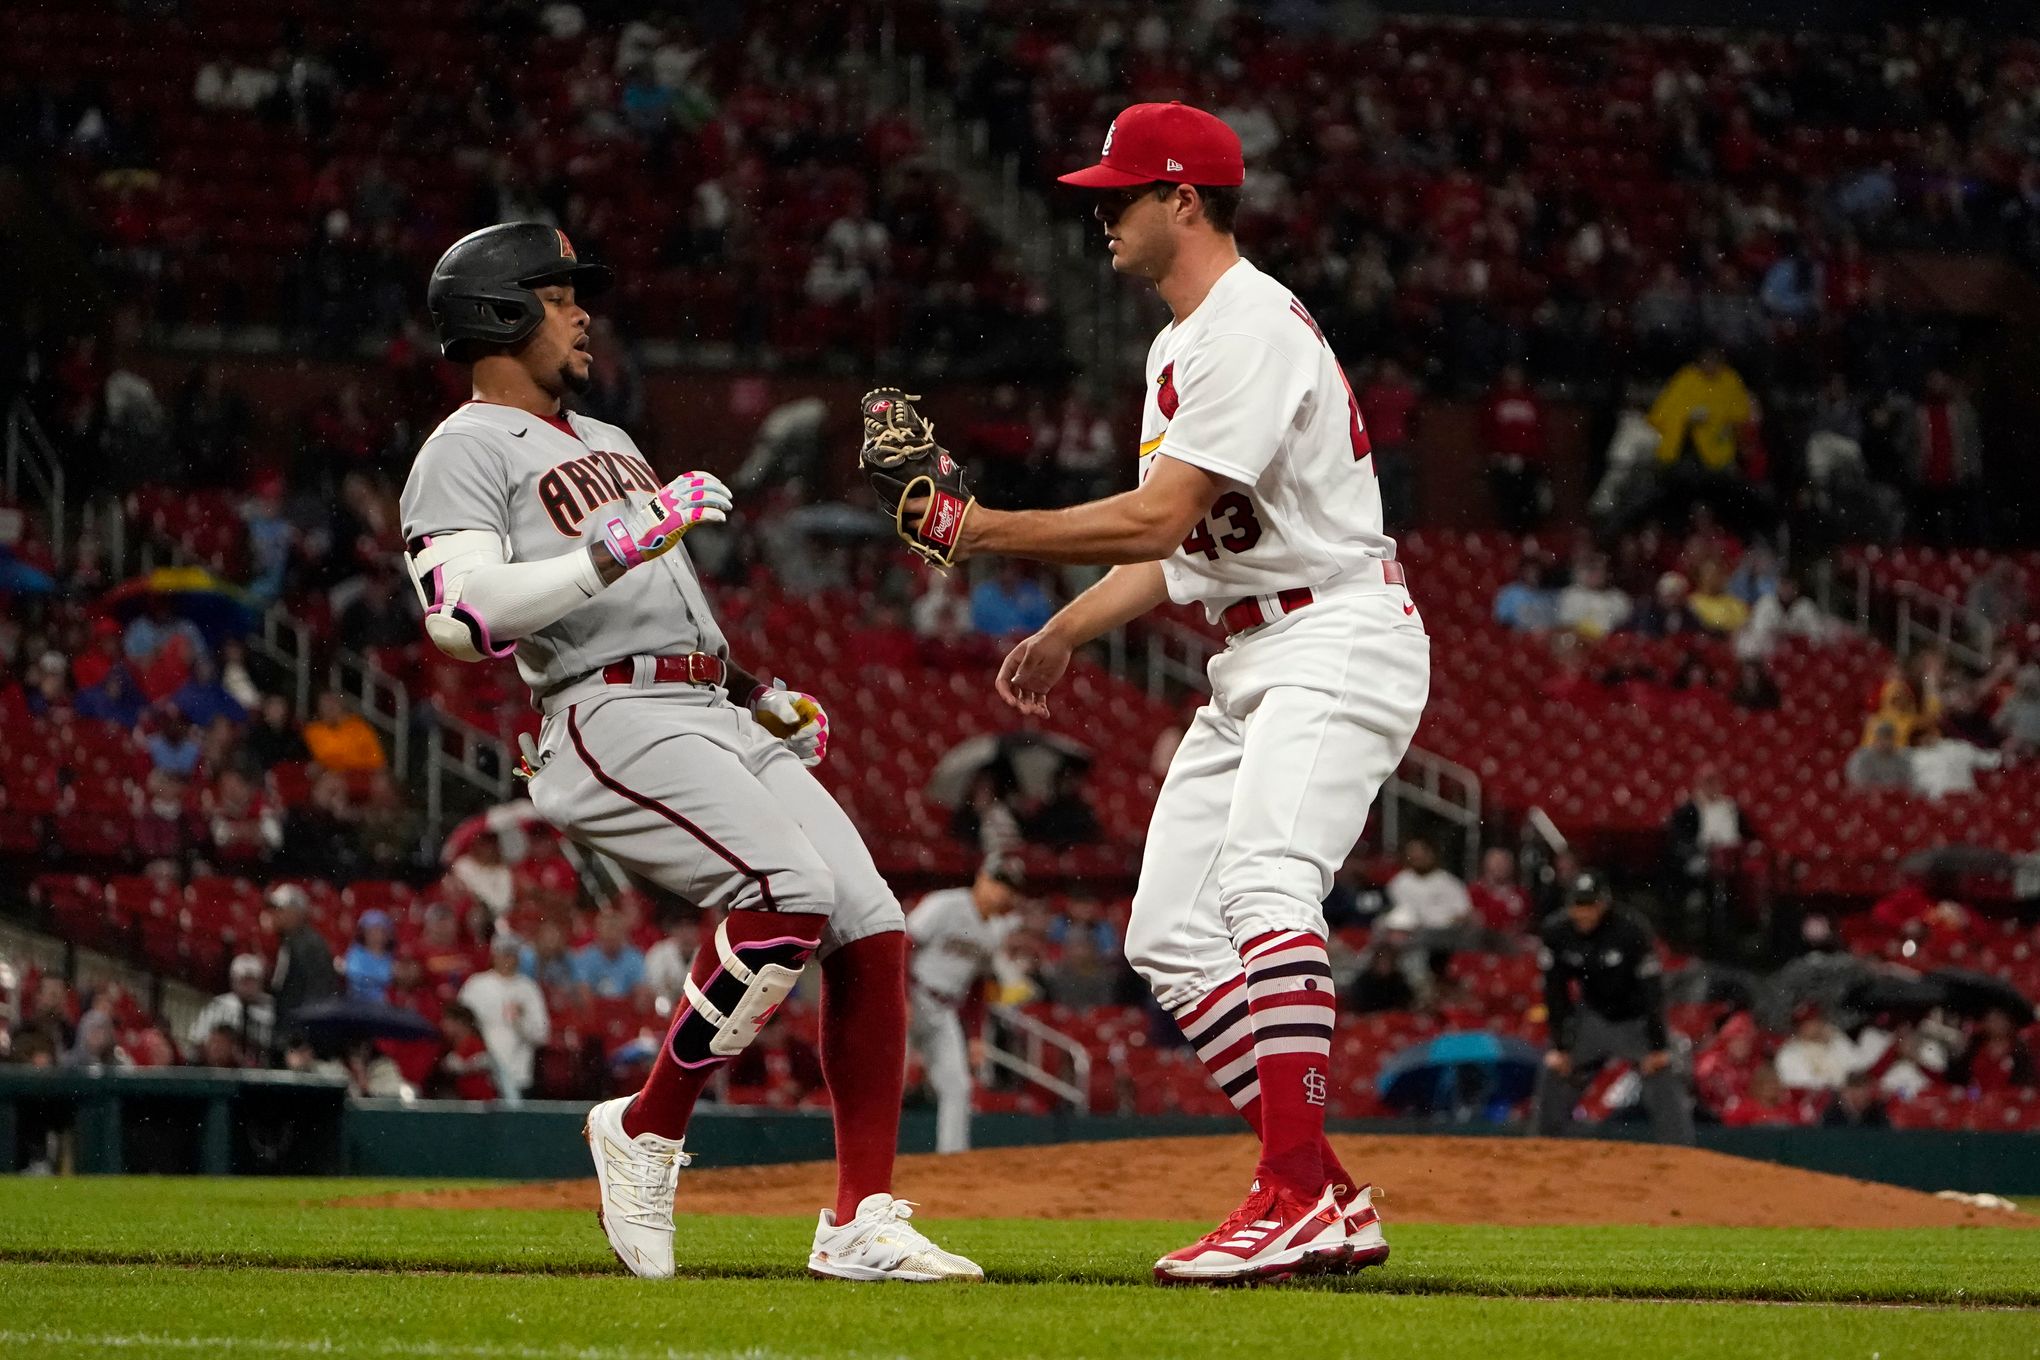 Bader's infield single lifts Cardinals past Giants 2-1